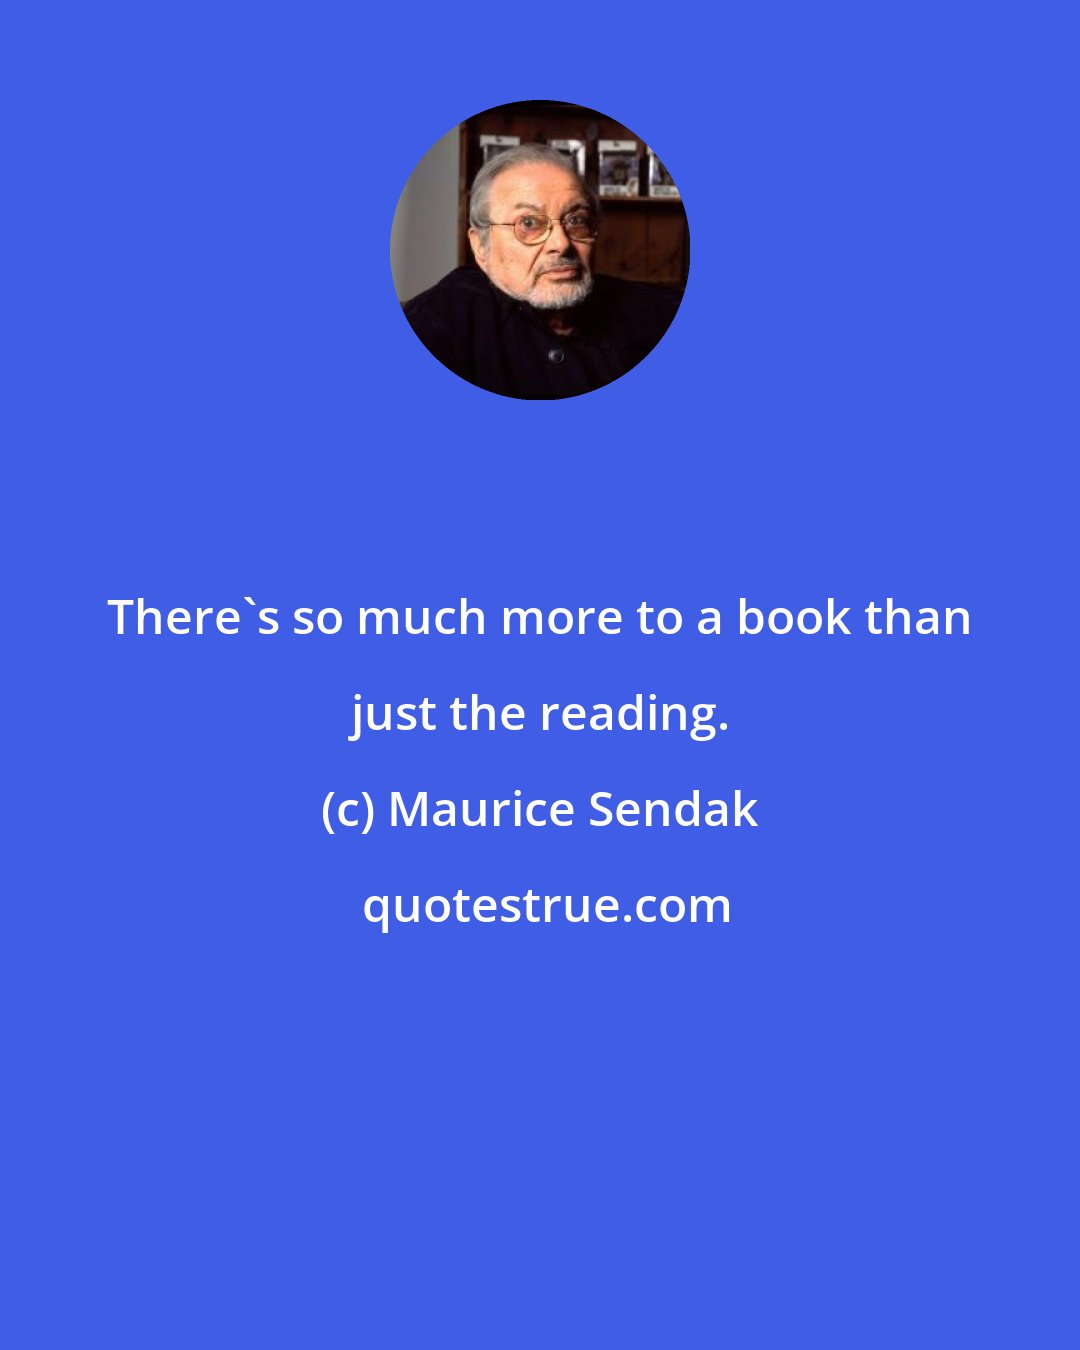 Maurice Sendak: There's so much more to a book than just the reading.